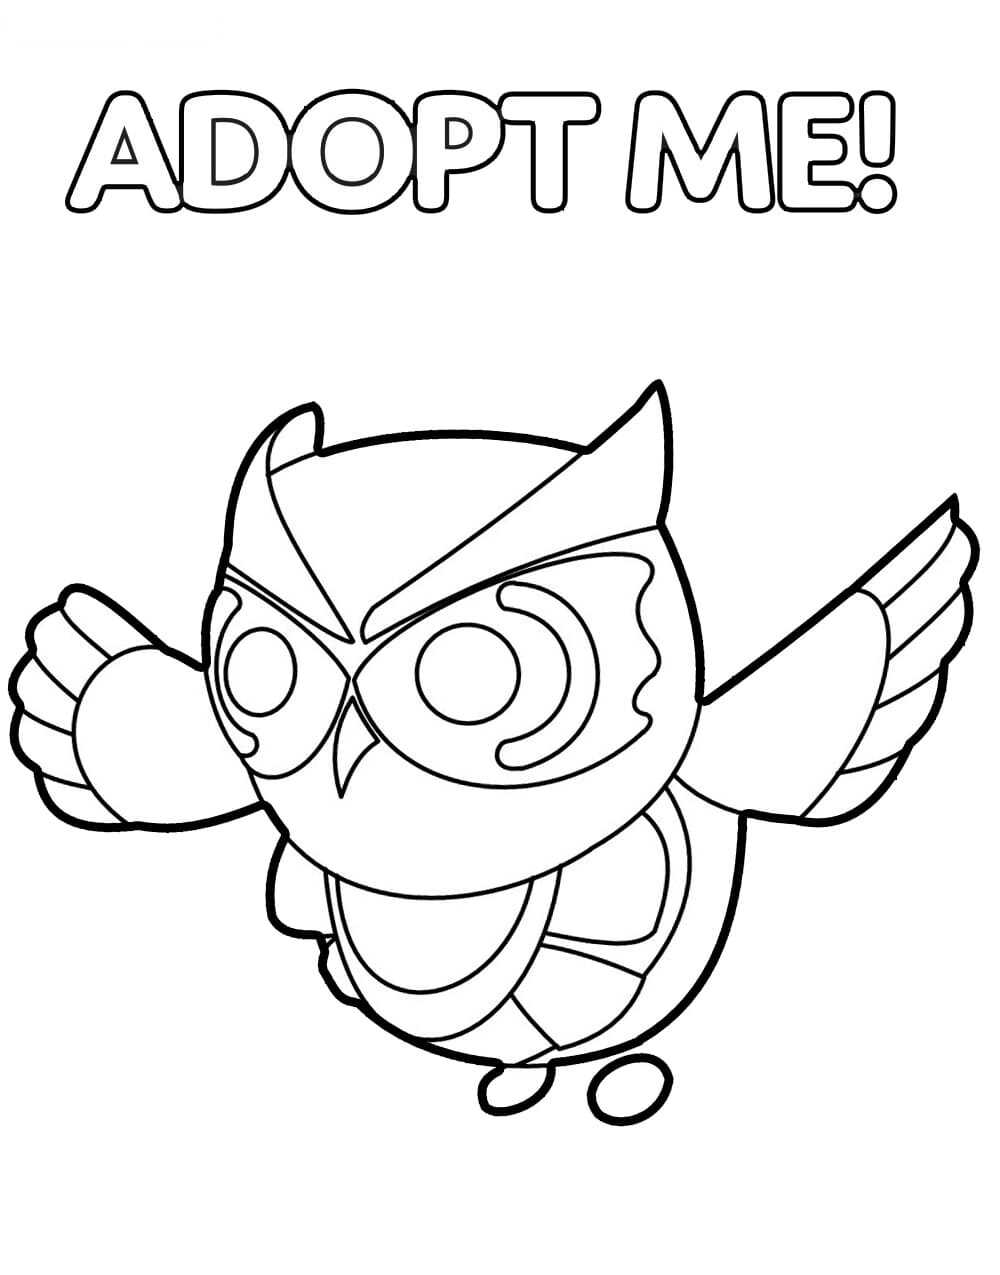 Snow Owl From Adopt Me Floats Up And Down And Flaps Its Wings Coloring Pages Adopt Me Coloring Pages Coloring Pages For Kids And Adults